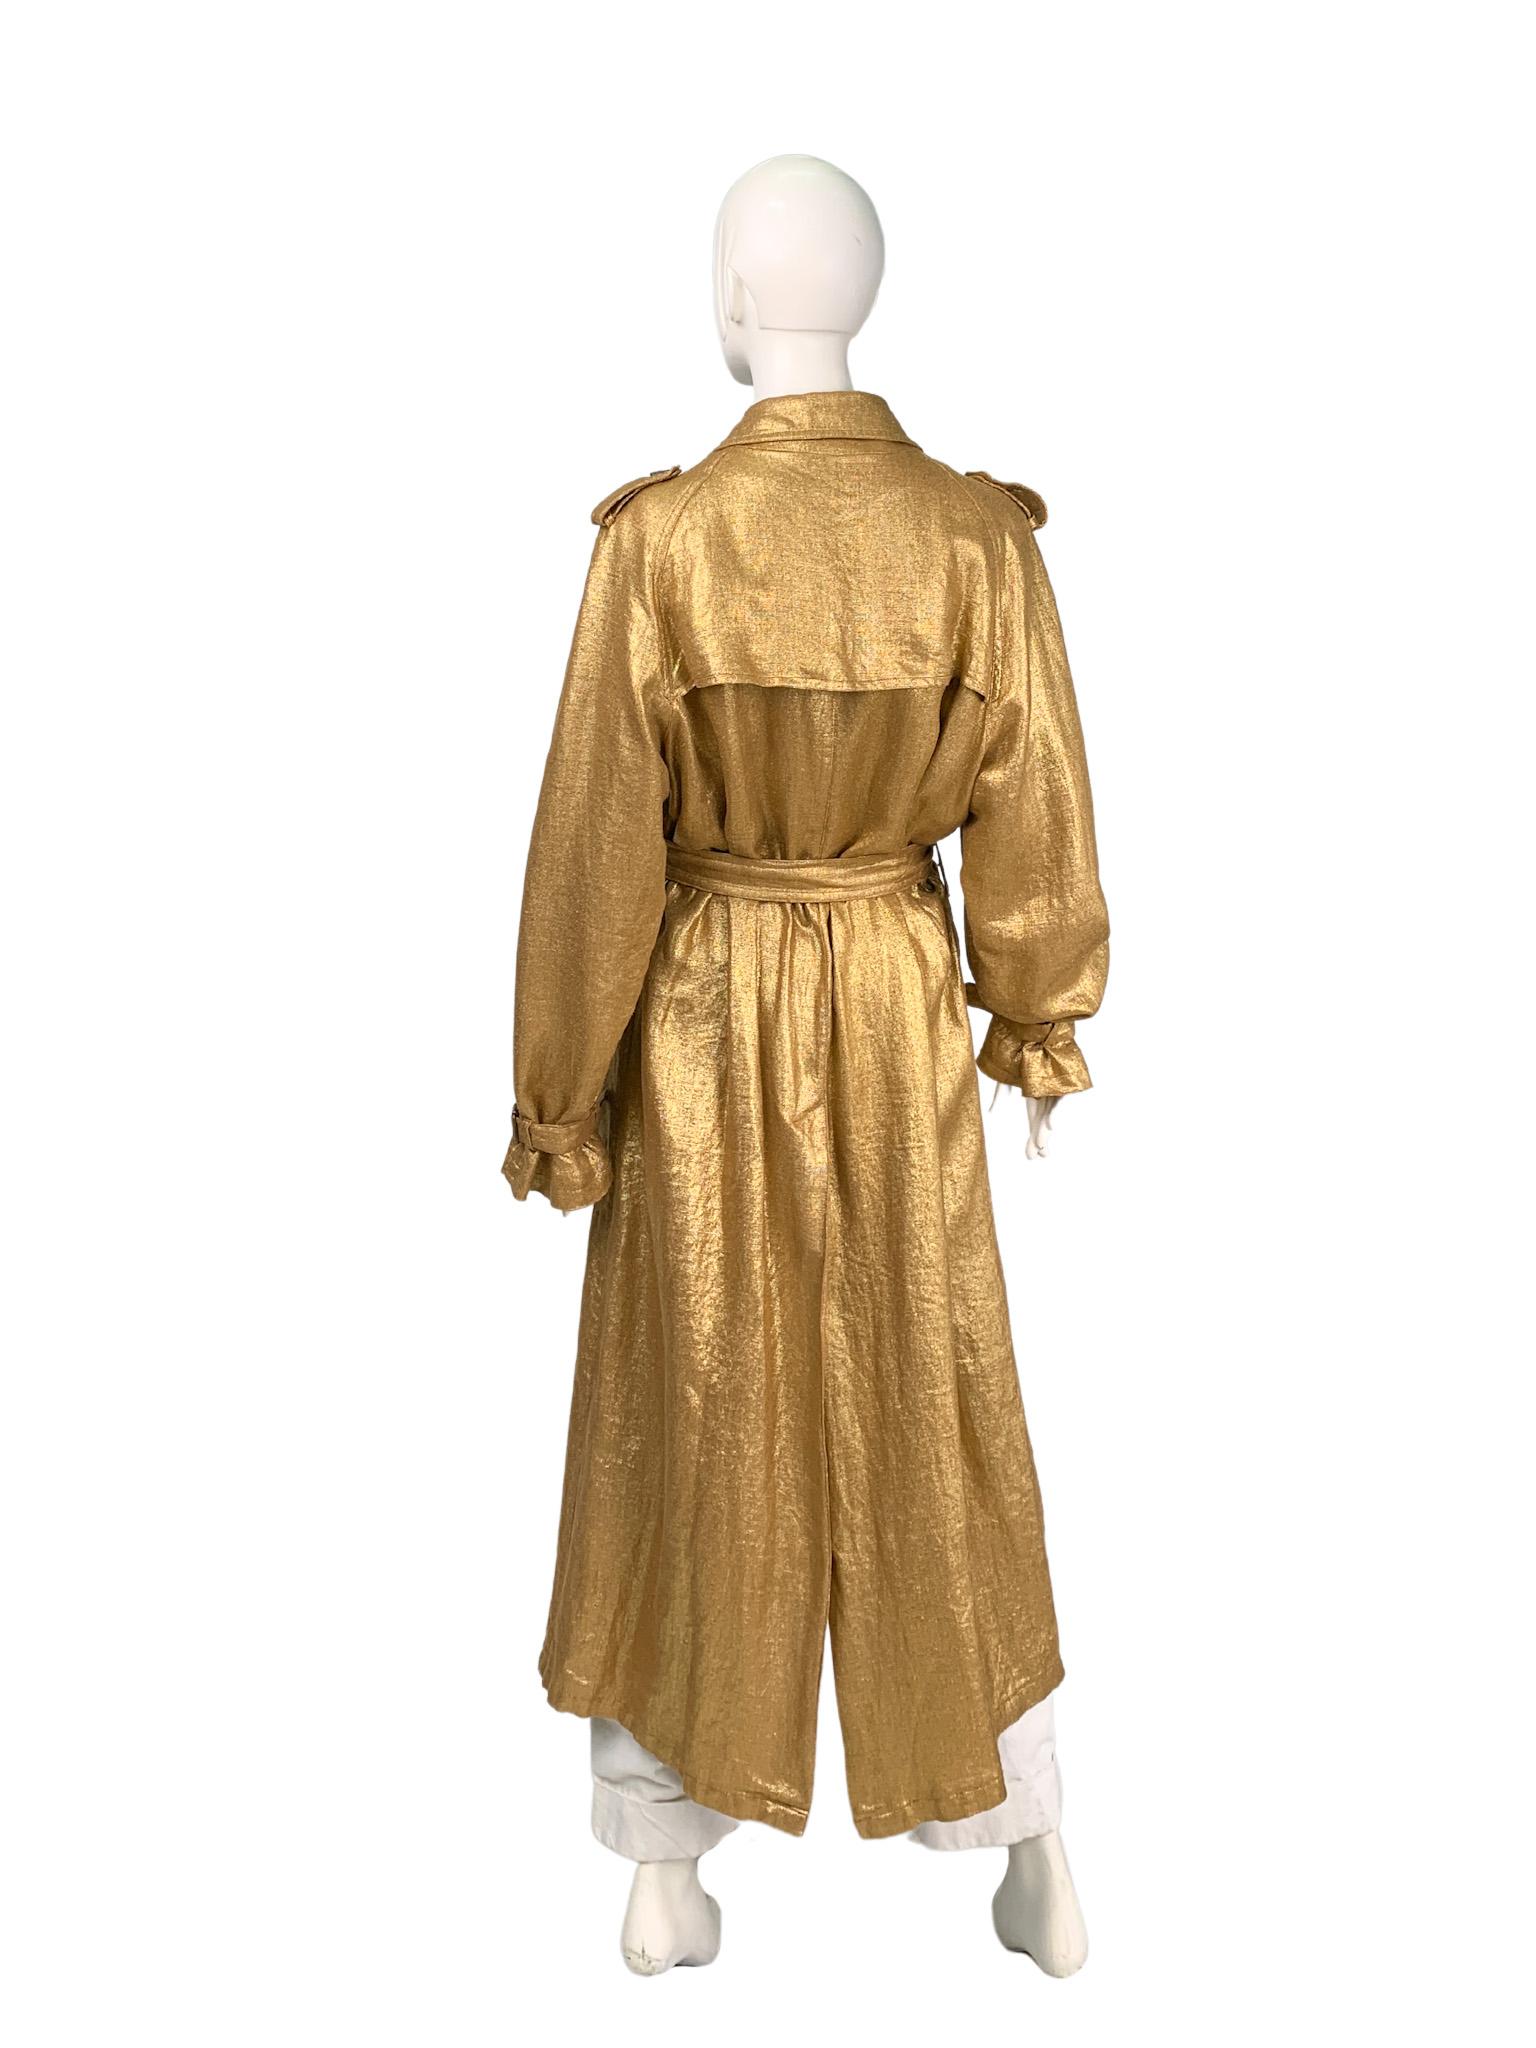 Dries Van Noten Metallic Gold Double-Breasted Belted Long Trench Coat, Unisex For Sale 4